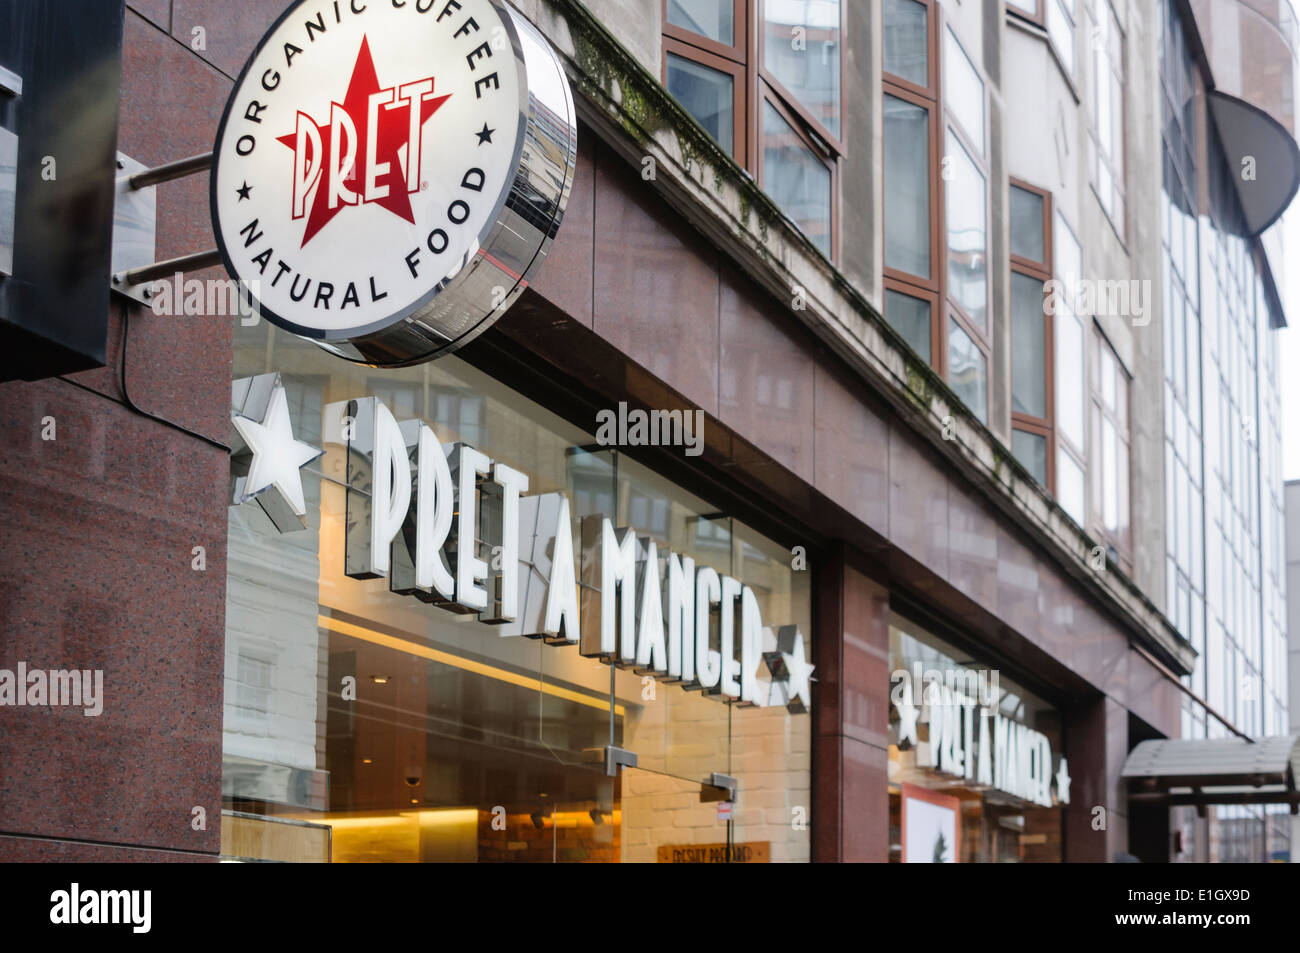 Pret a Manger store Stock Photo